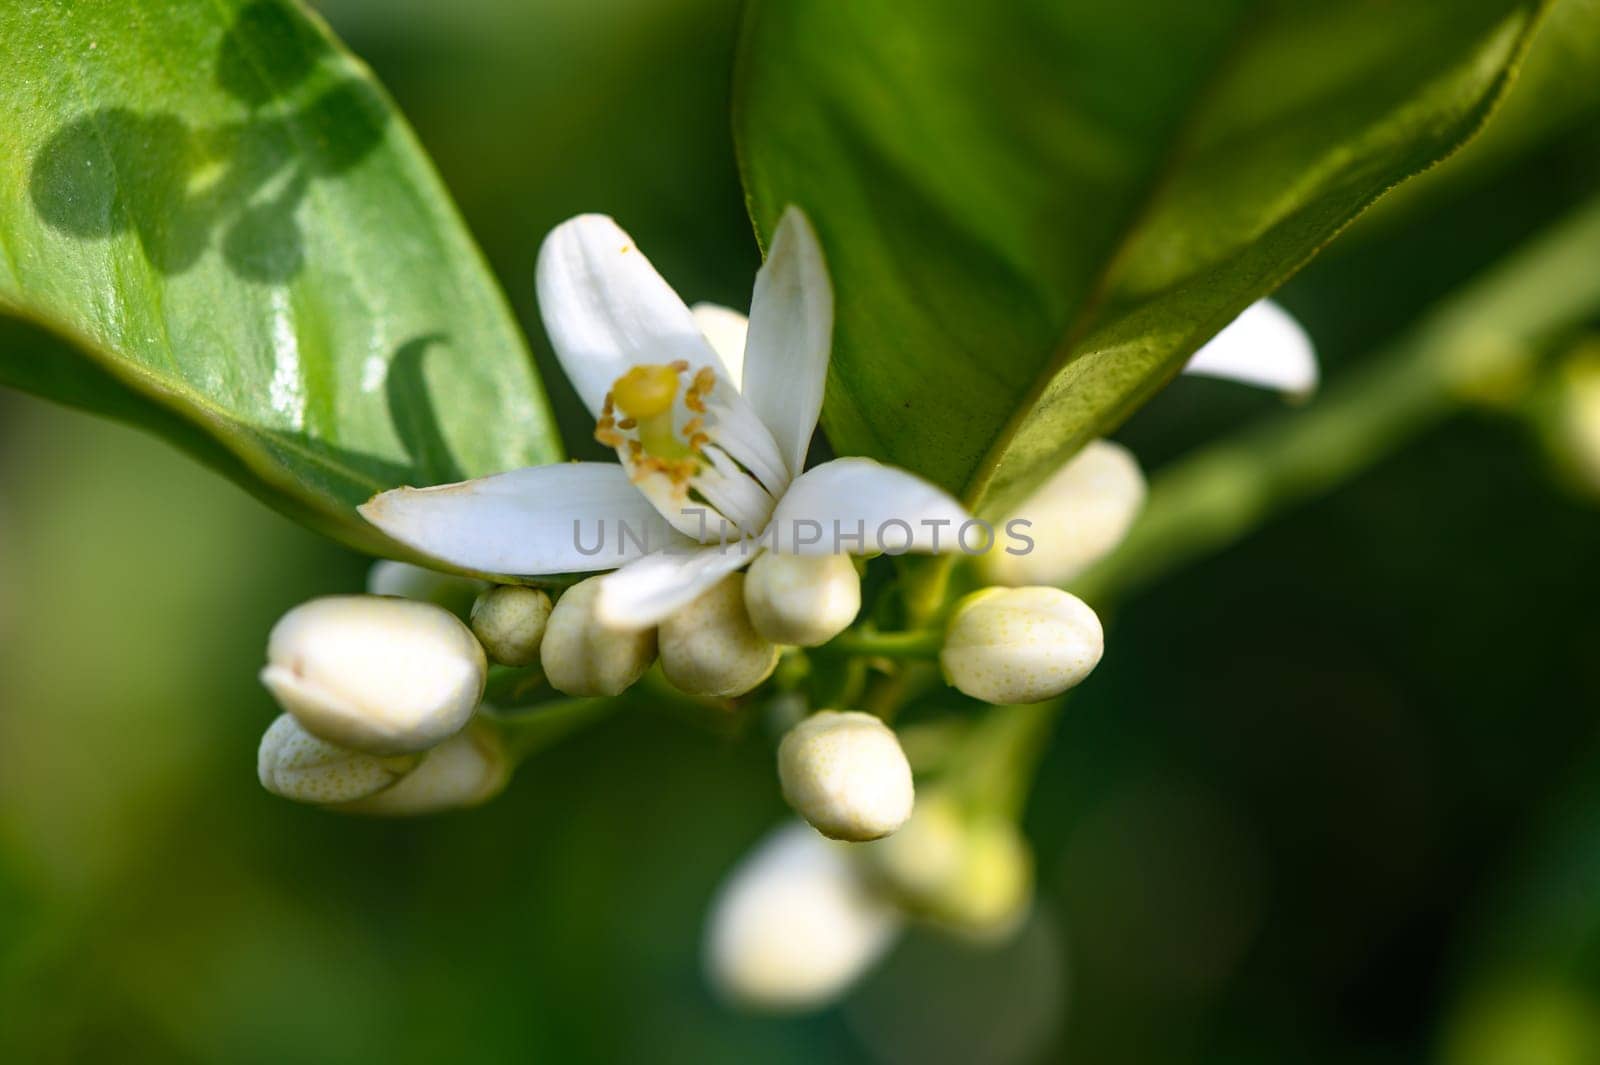 Lemon flower and leaves in a village in the Turkish Republic of Northern Cyprus 7